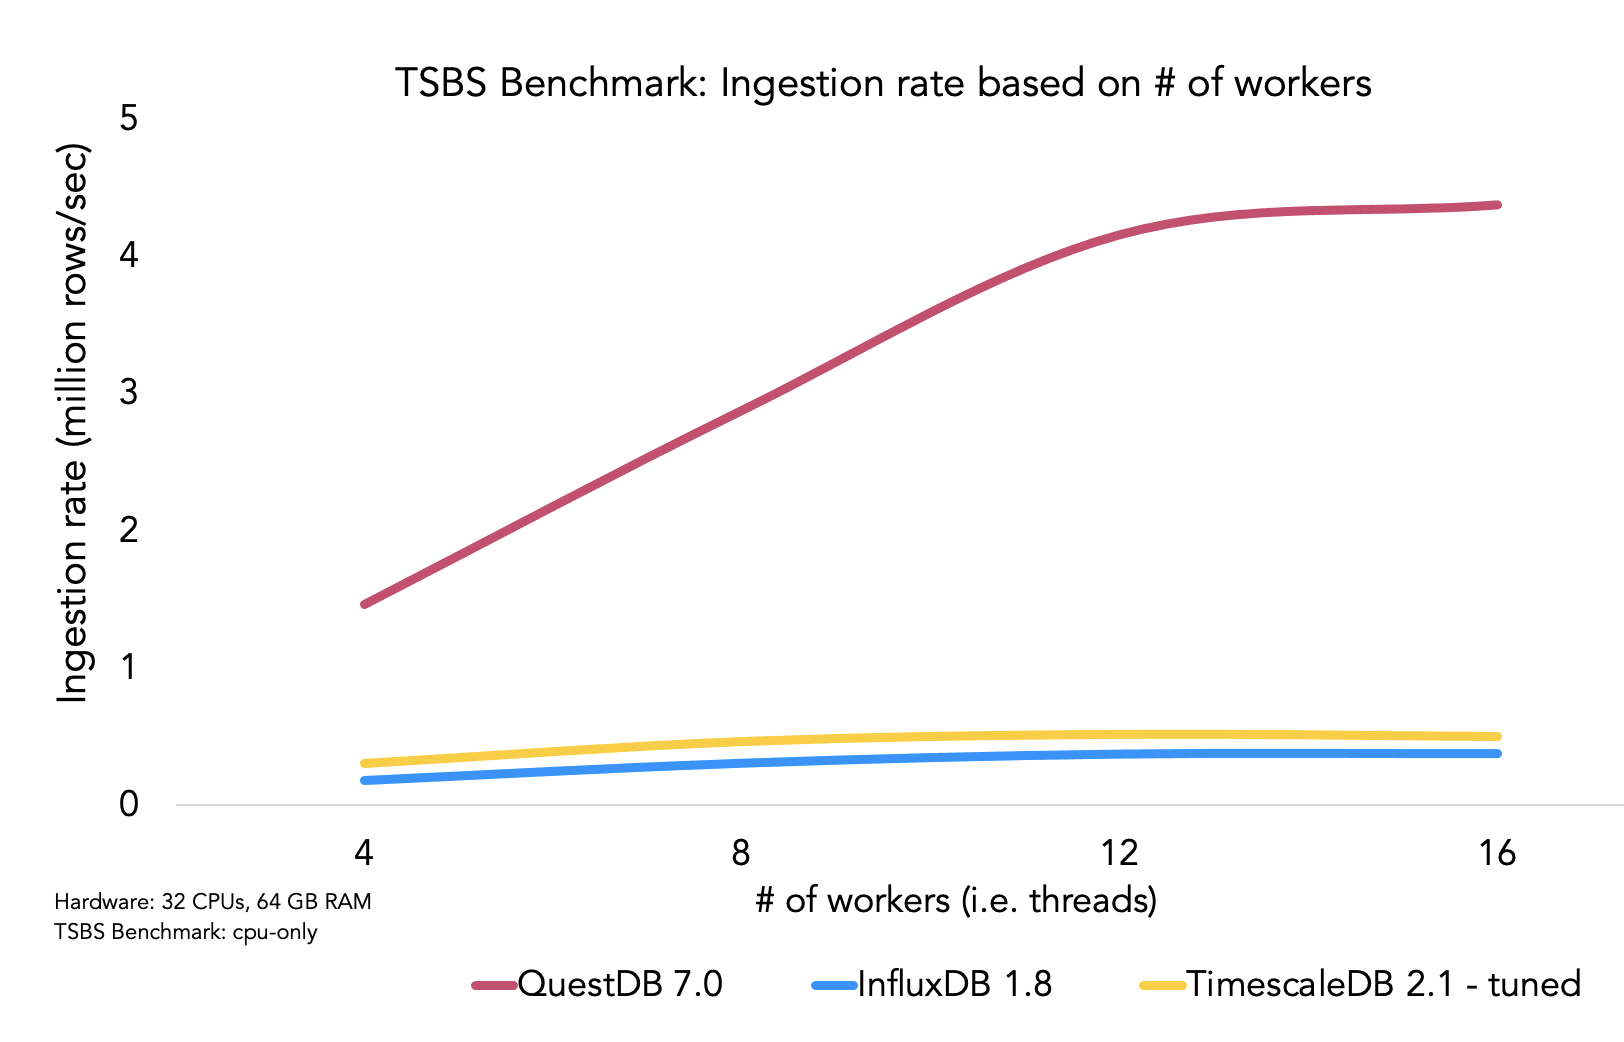 A chart comparing the ingestion rate of QuestDB, InfluxDB and TimescaleDB.